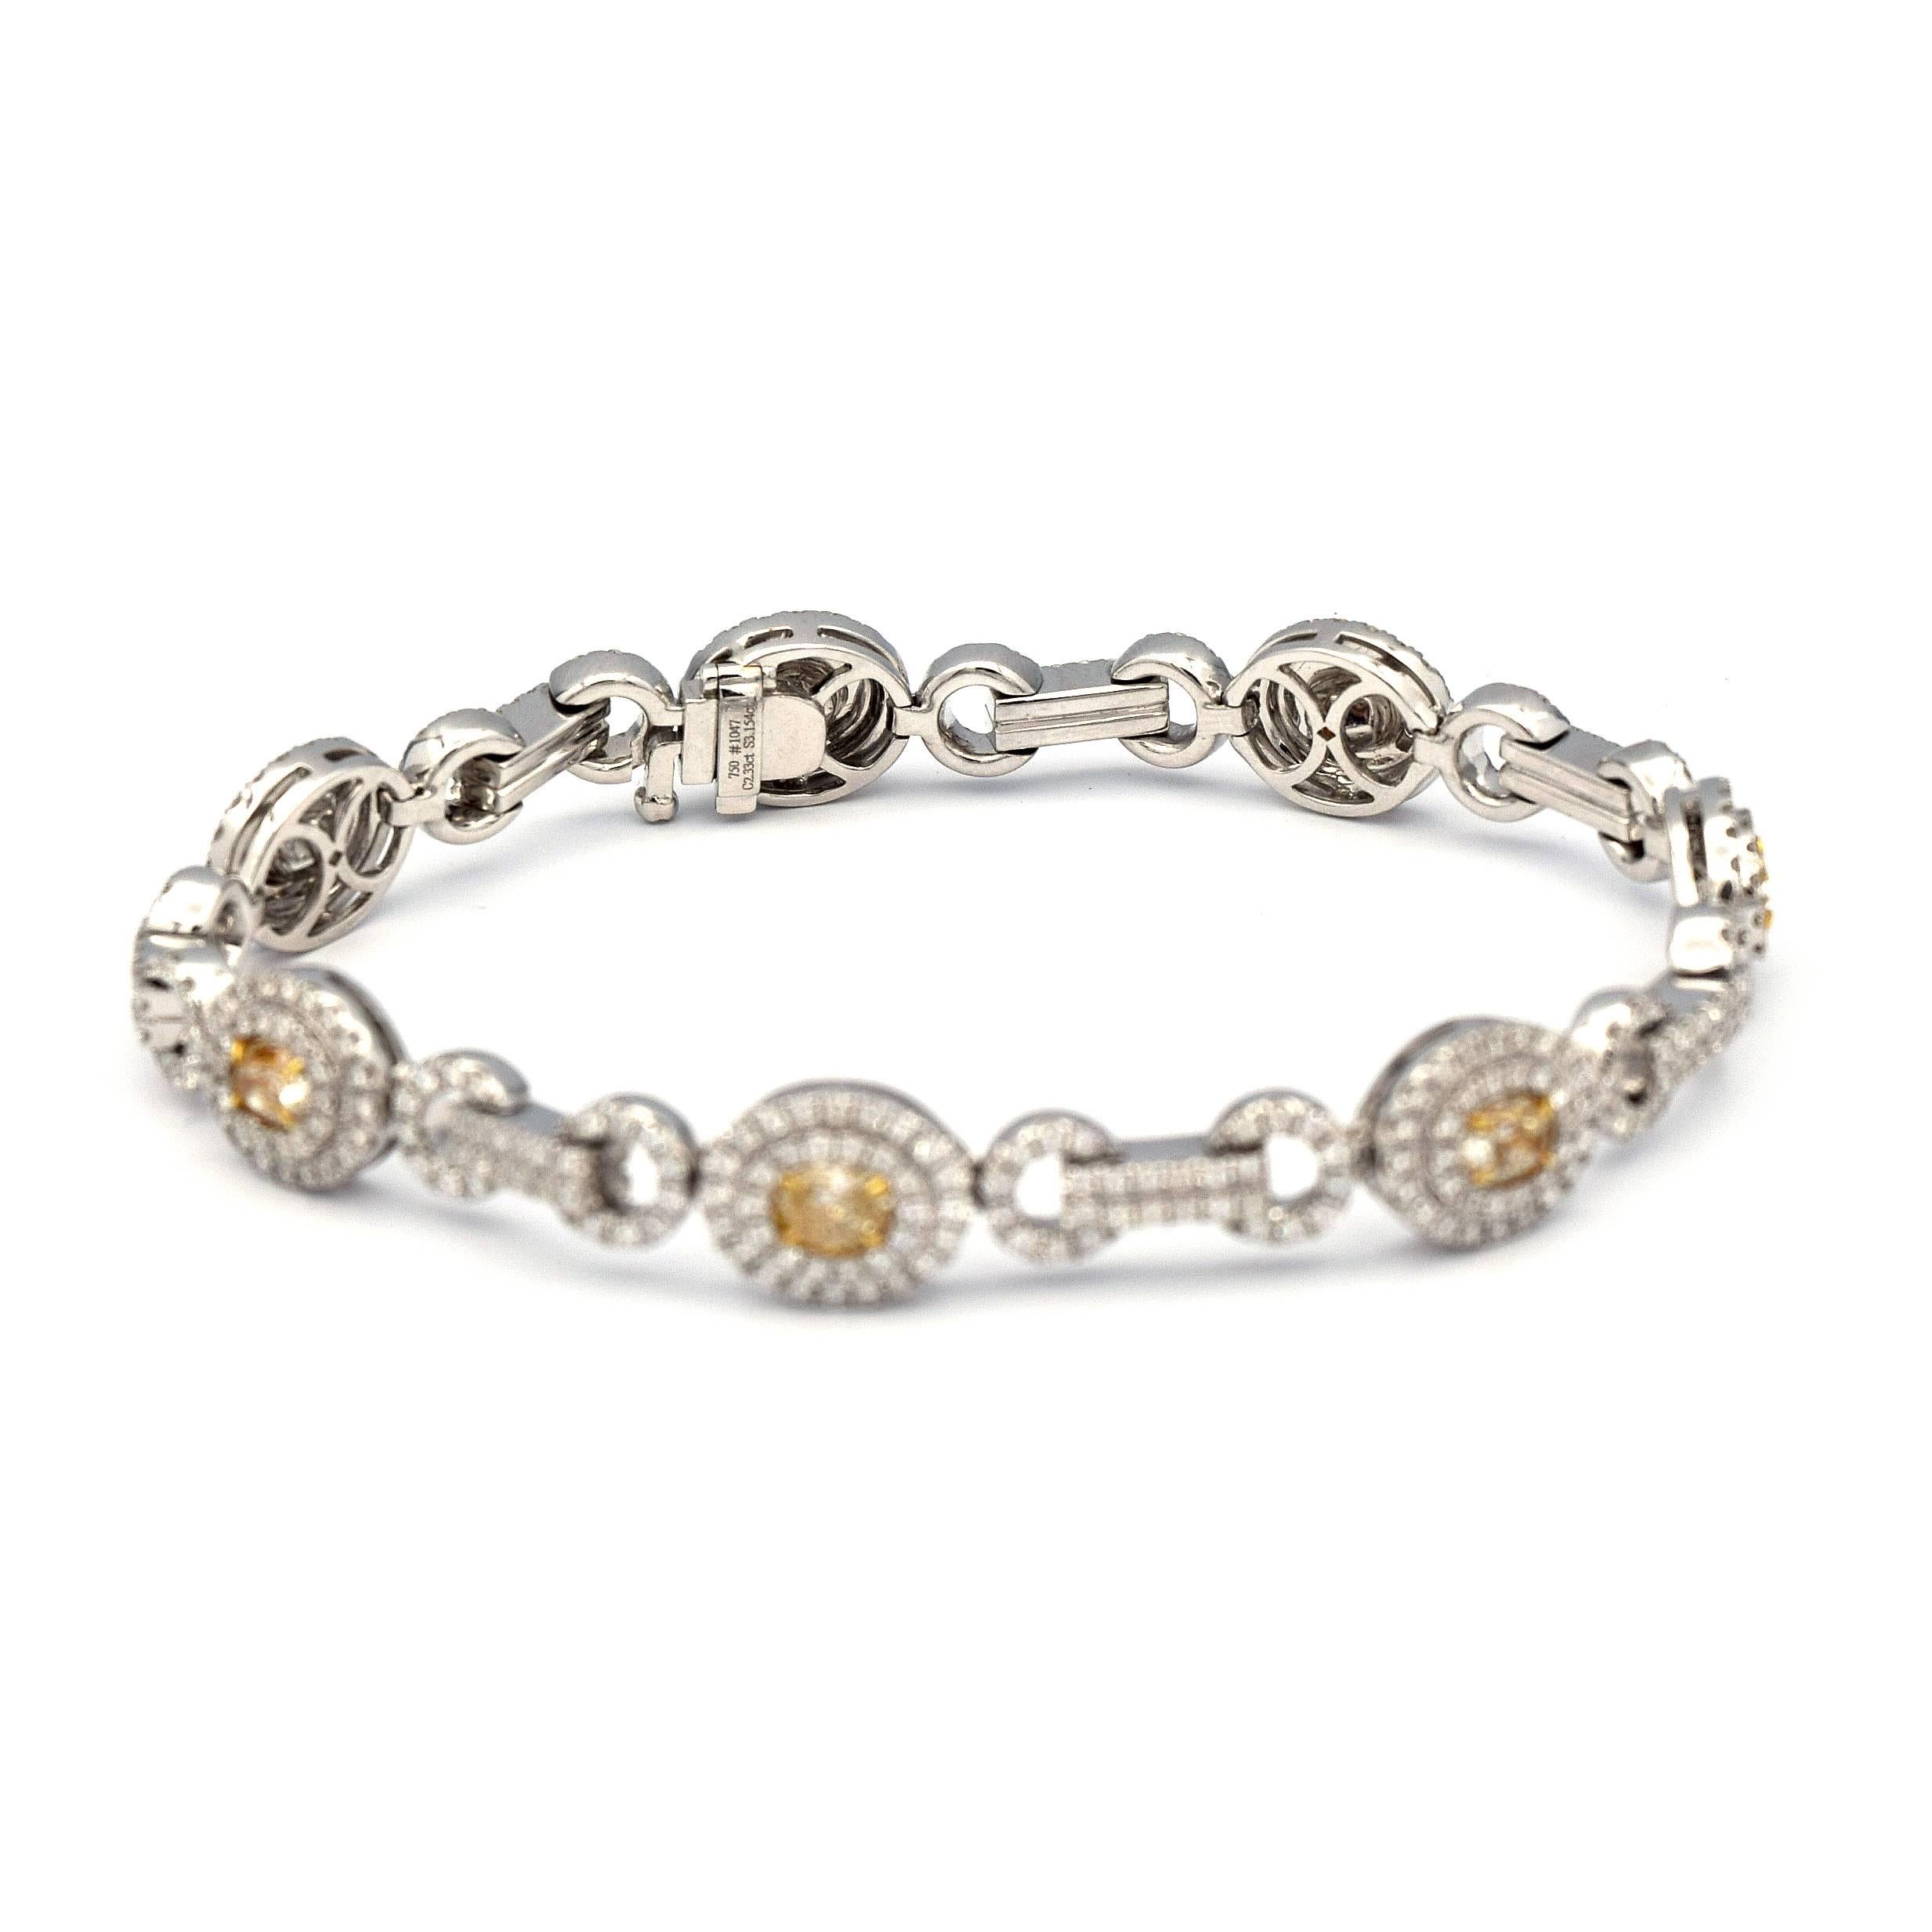 This Stunning and sophisticated bracelet has 7 beautiful Oval Shaped Fancy Light Yellow Diamonds, along with Pave White Diamonds, all giving a total caret weight of 2.33ct.

Mounted in 18K White Gold, giving it a total weight of 25.72 grams. 